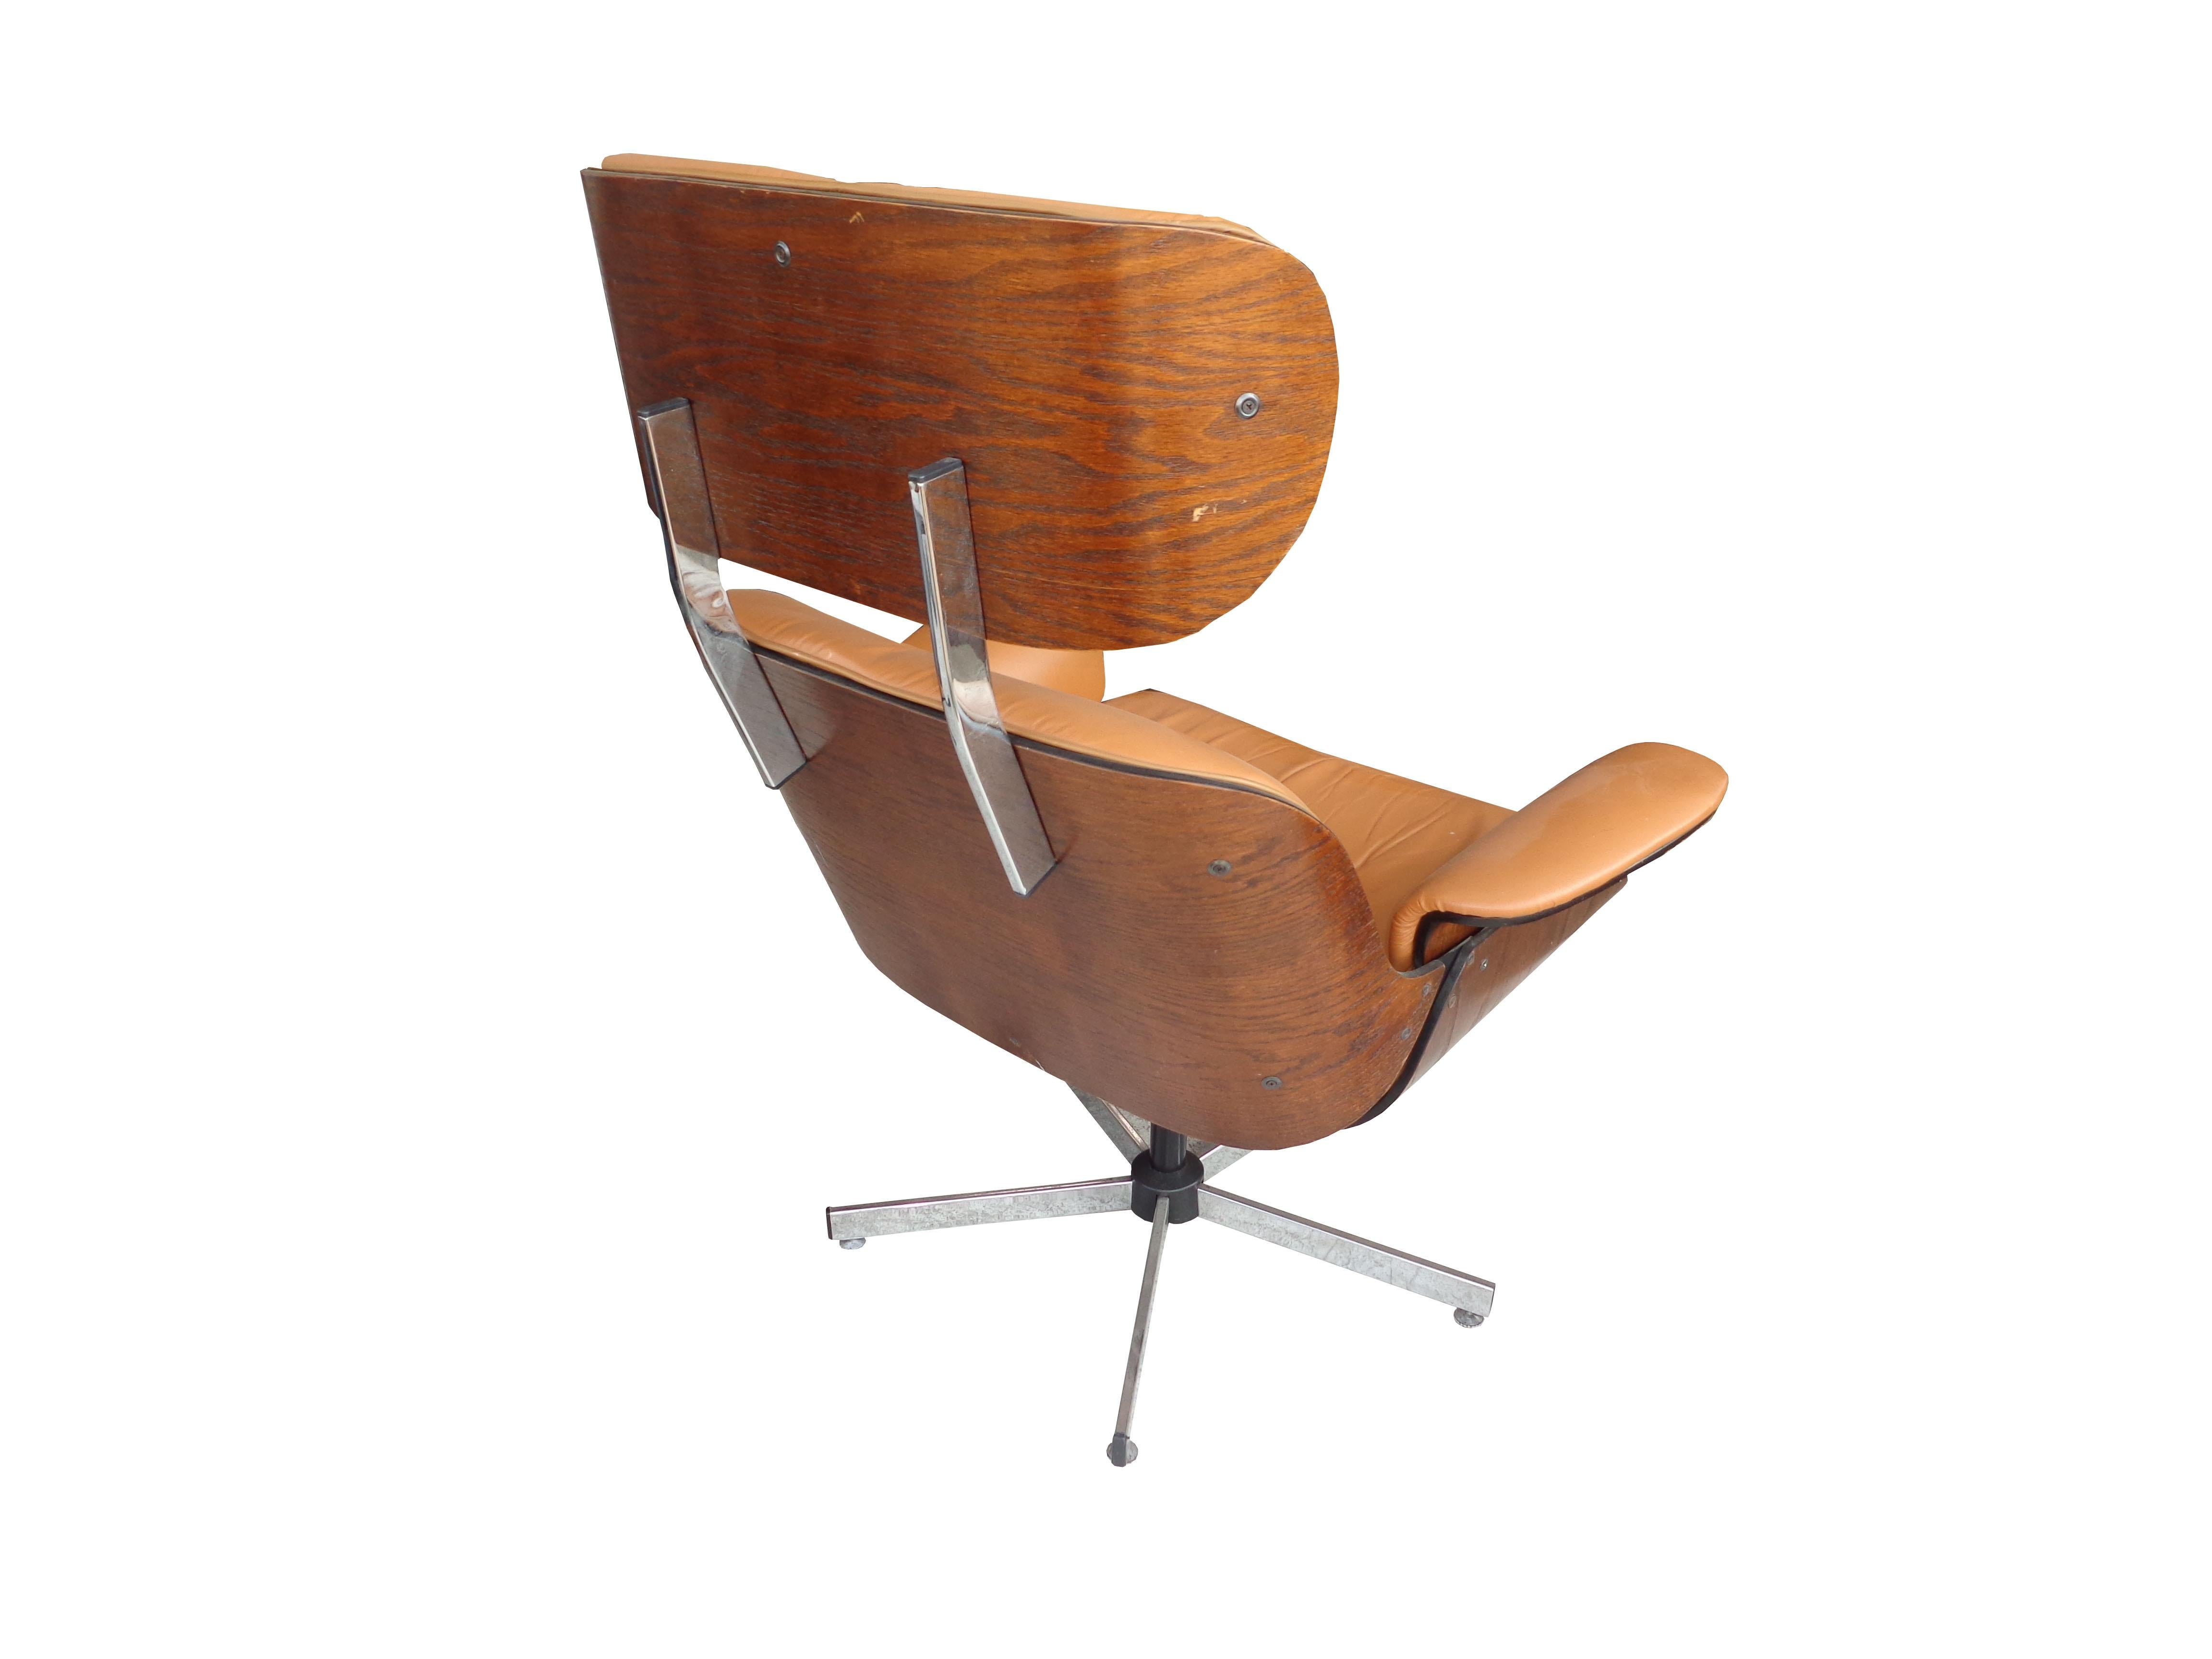 selig plycraft lounge chair